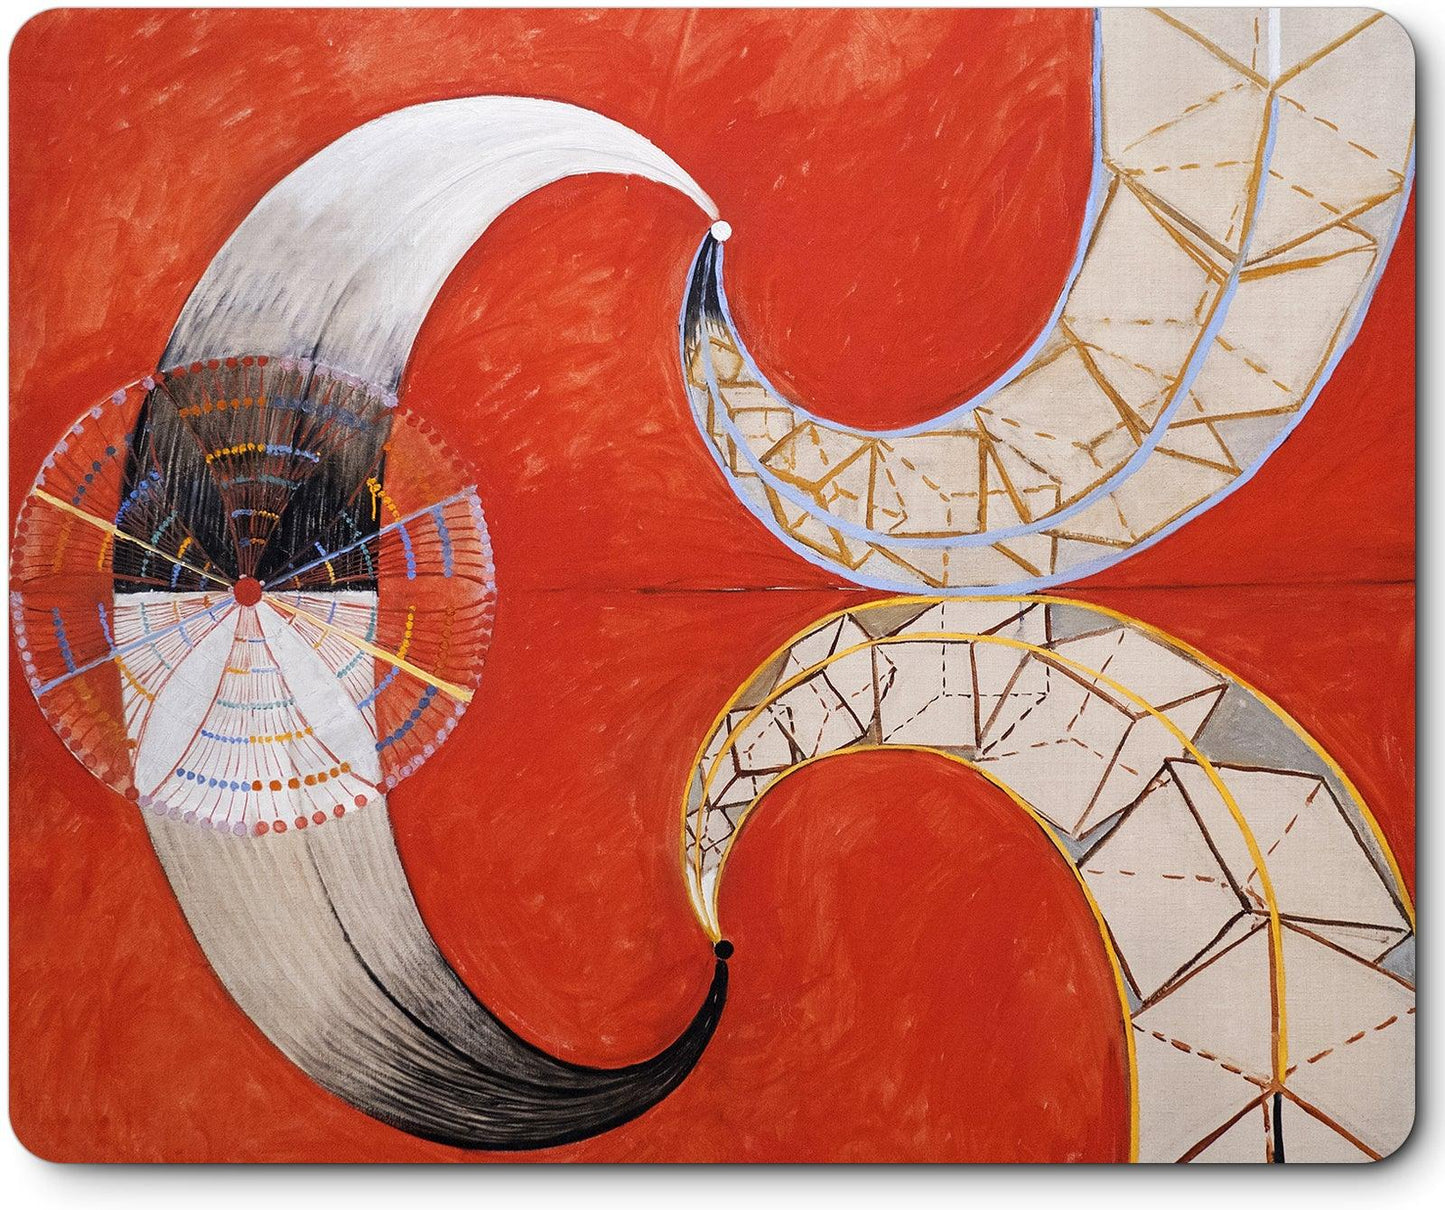 Art Square Mouse Pad 9.5 x 7.9 Inches (The Swan No.9 by Hilma af Klint) - Berkin Arts